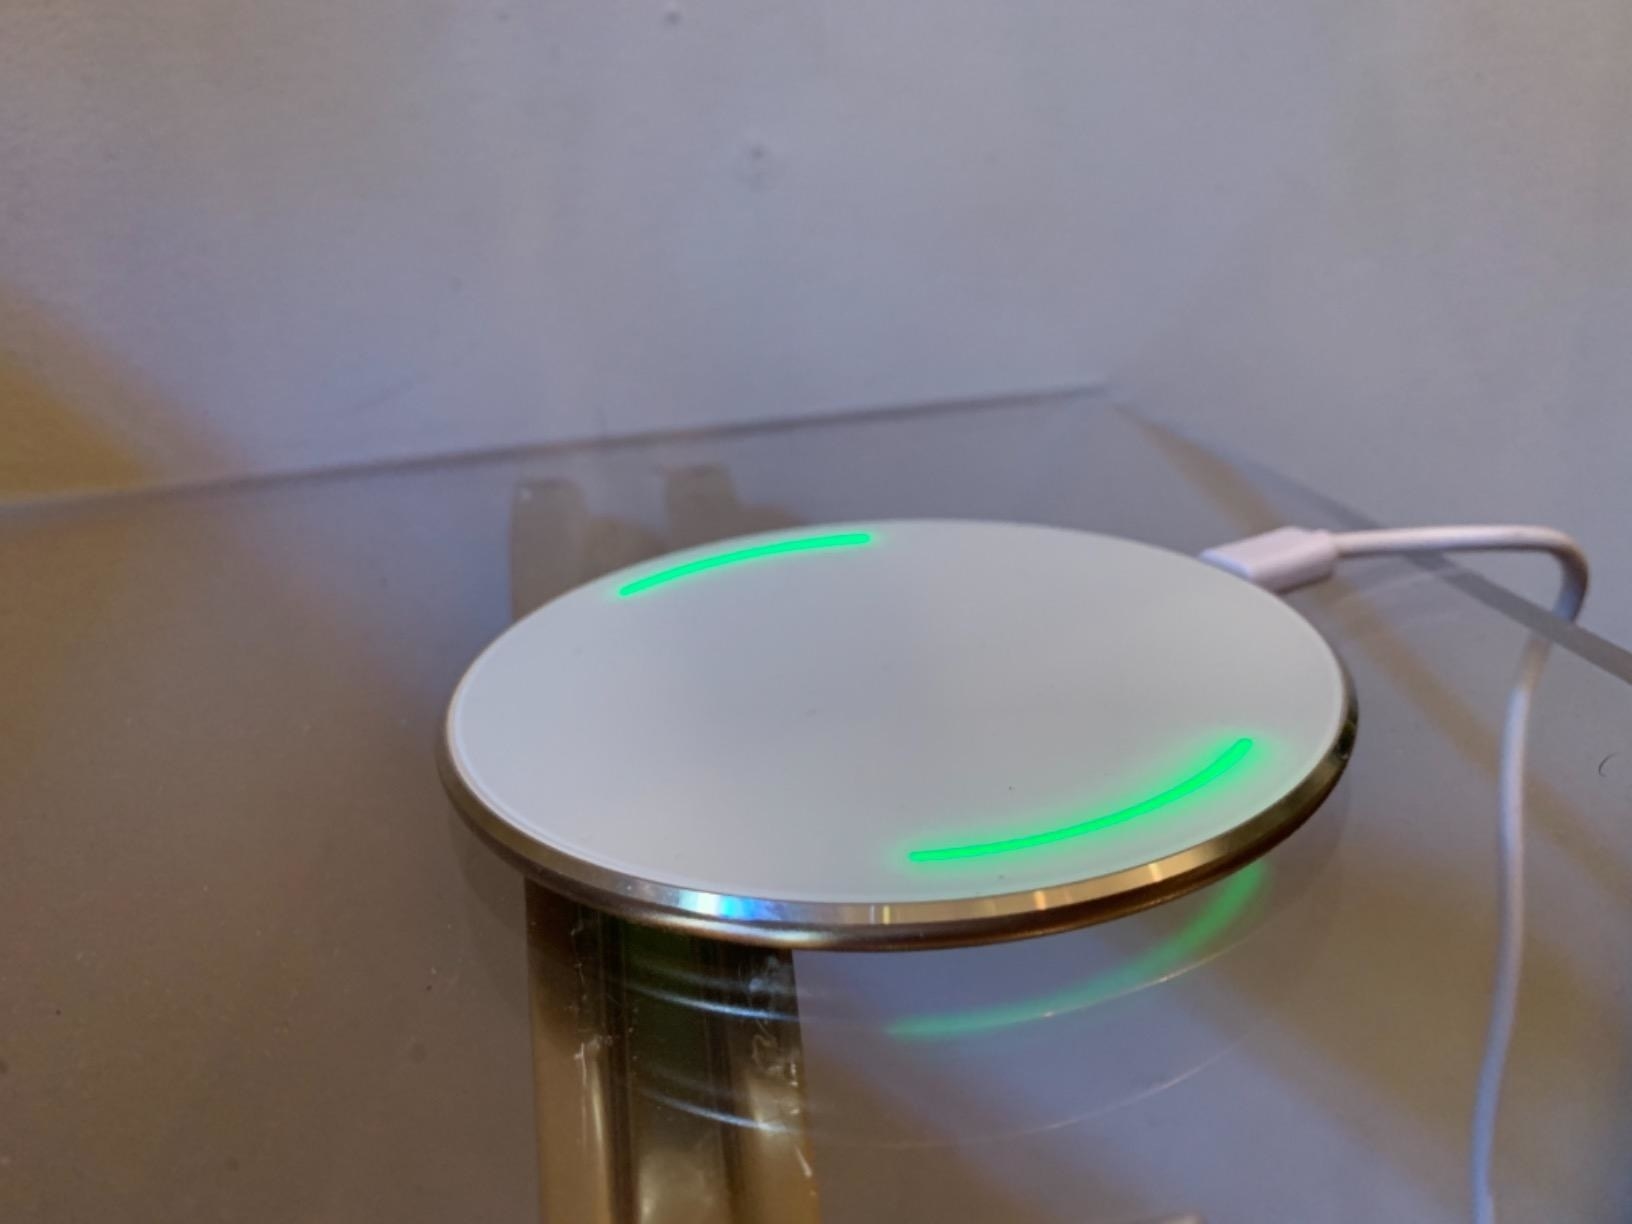 Reviewer photo of the wireless charger